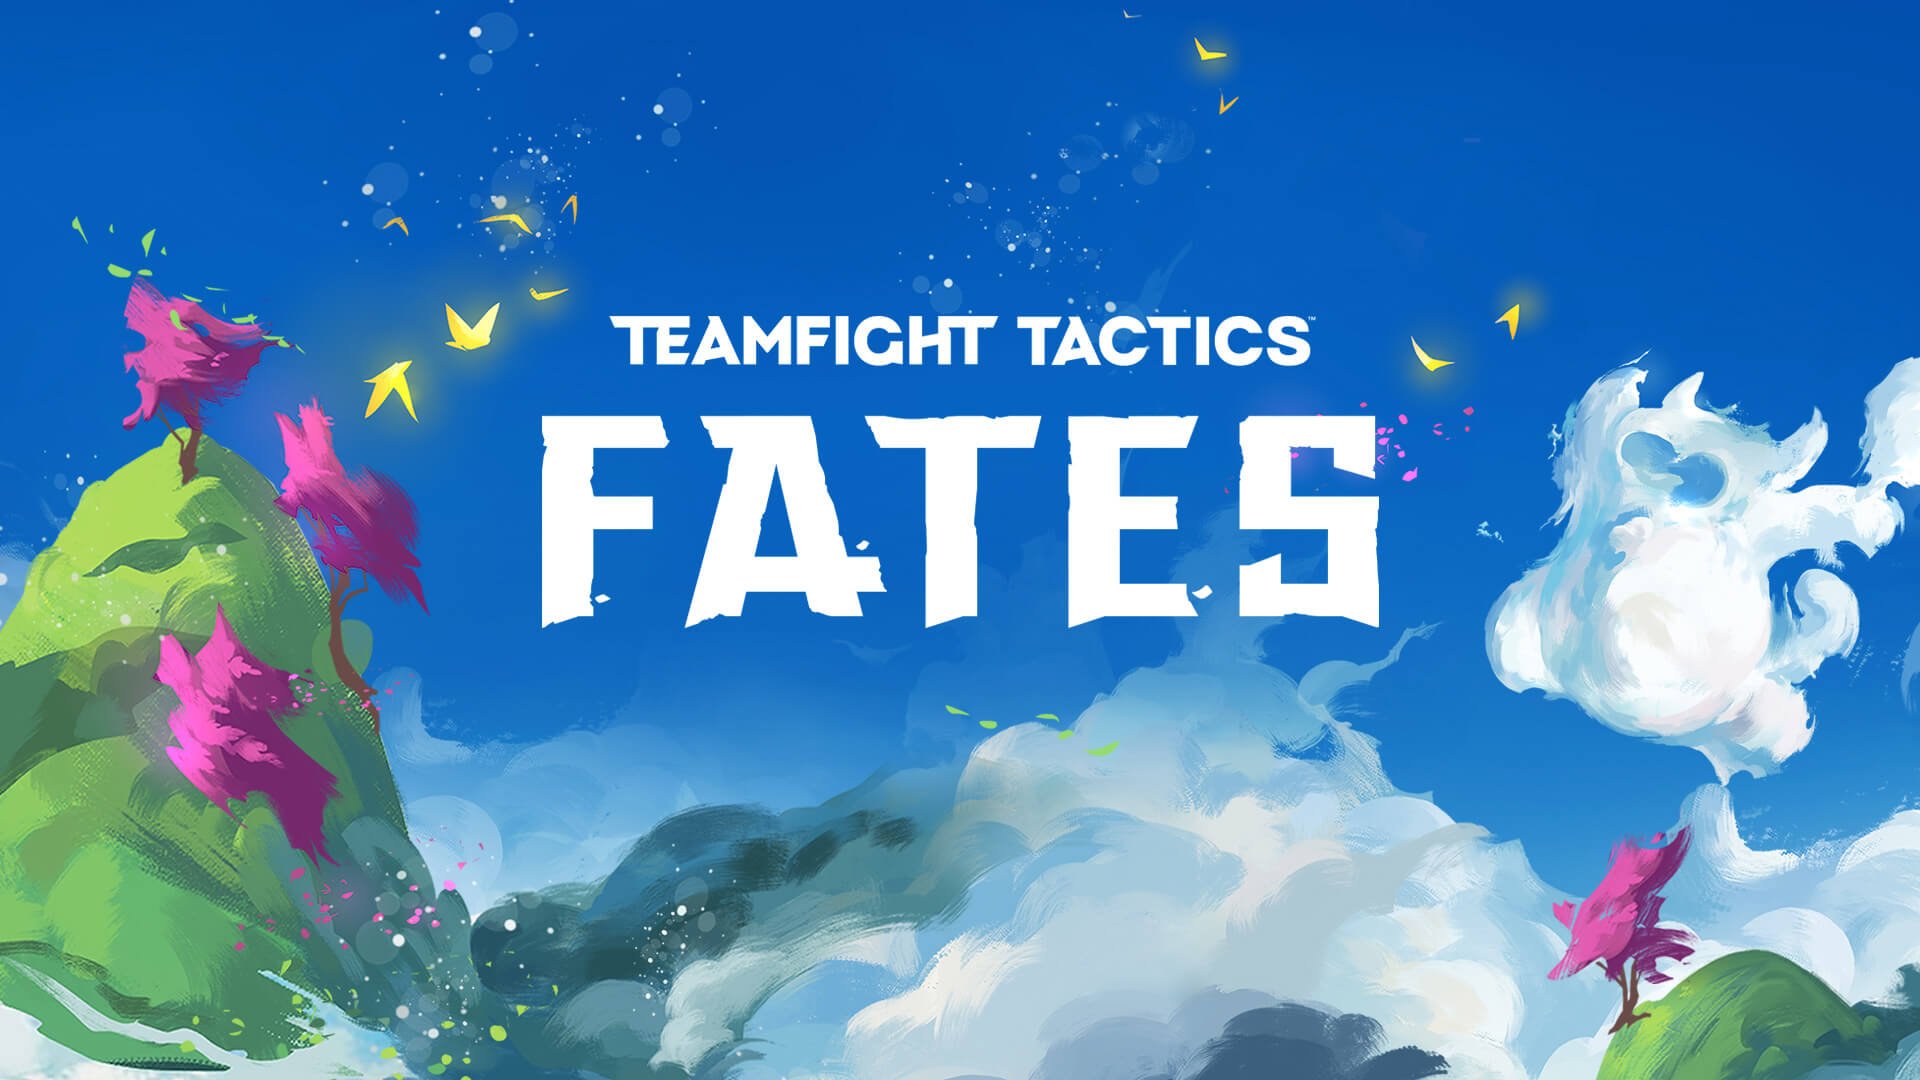 Teamfight Tactics Set 4: Fates is Now Available